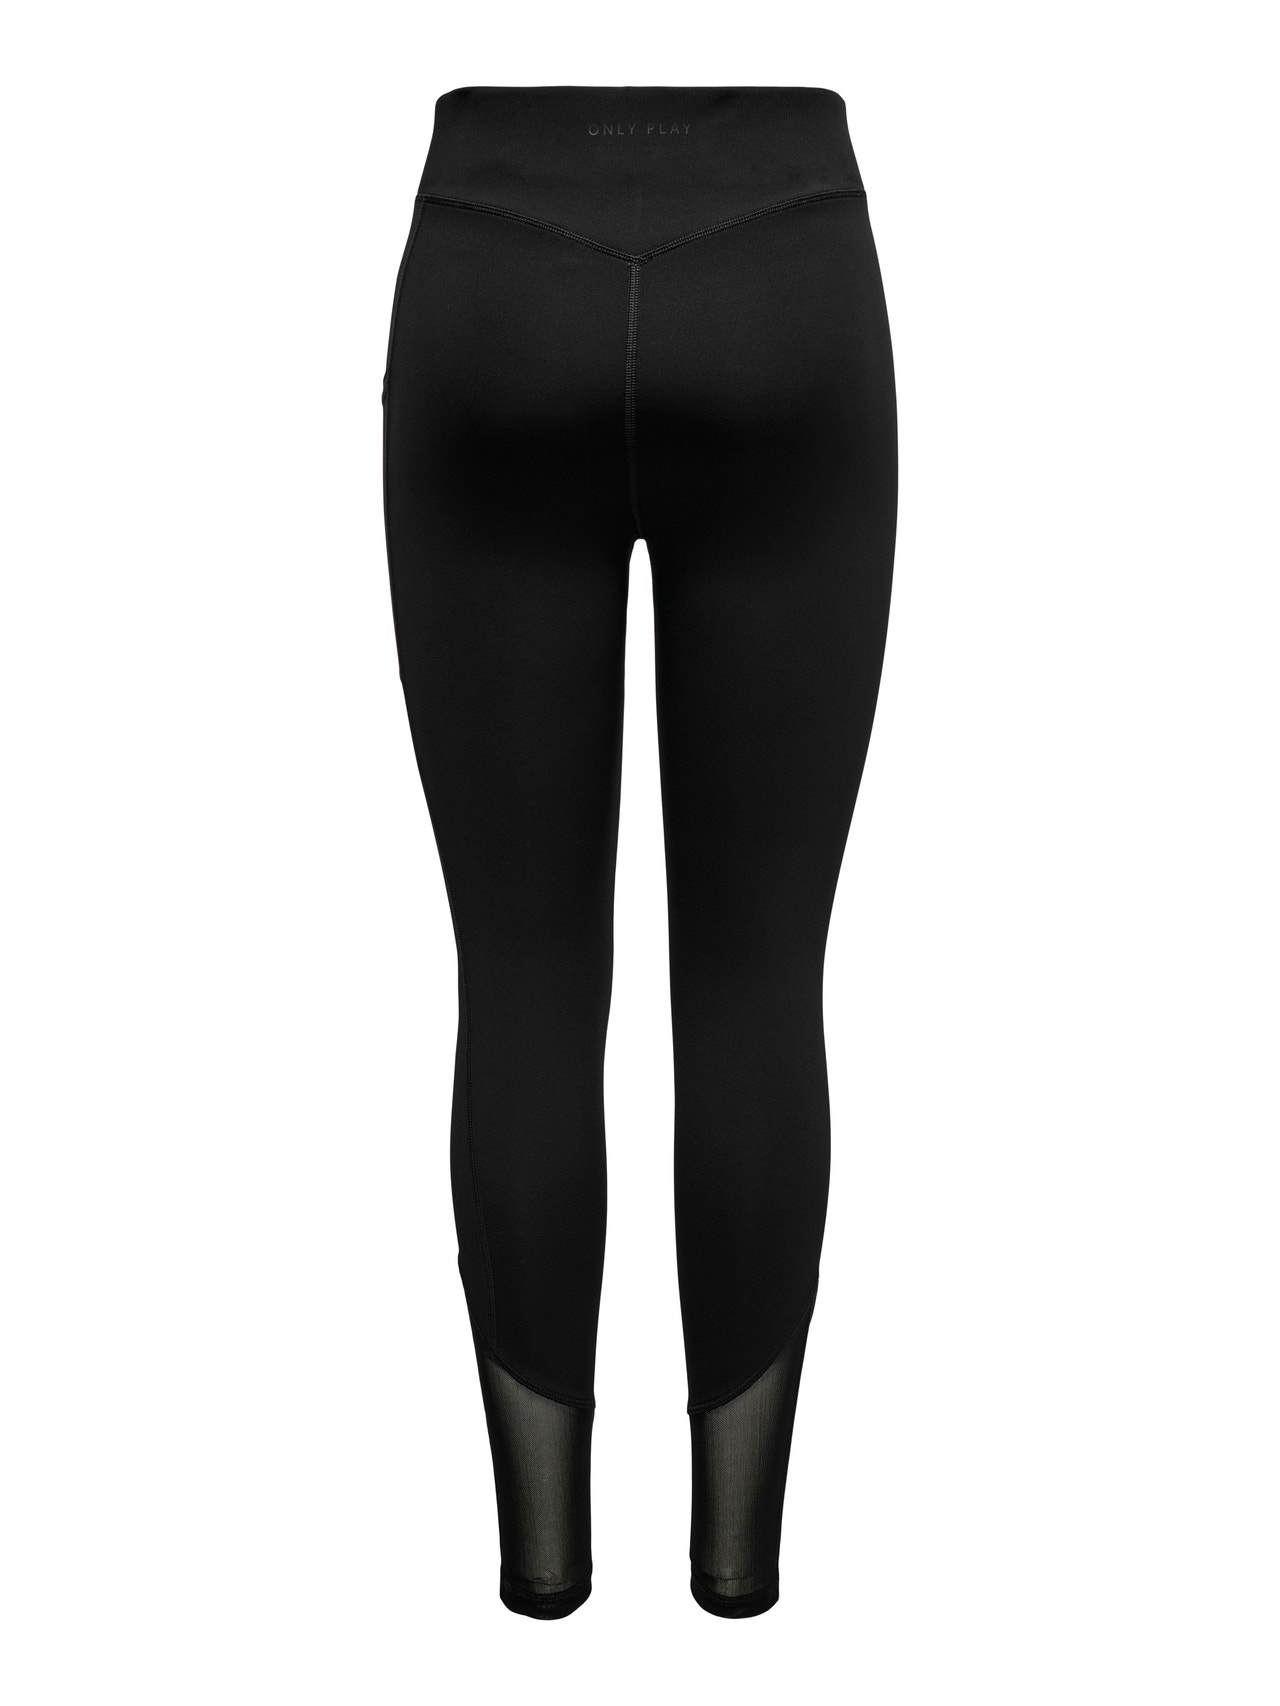 ONLY Tight fit High waist Legging -Black - 15190107